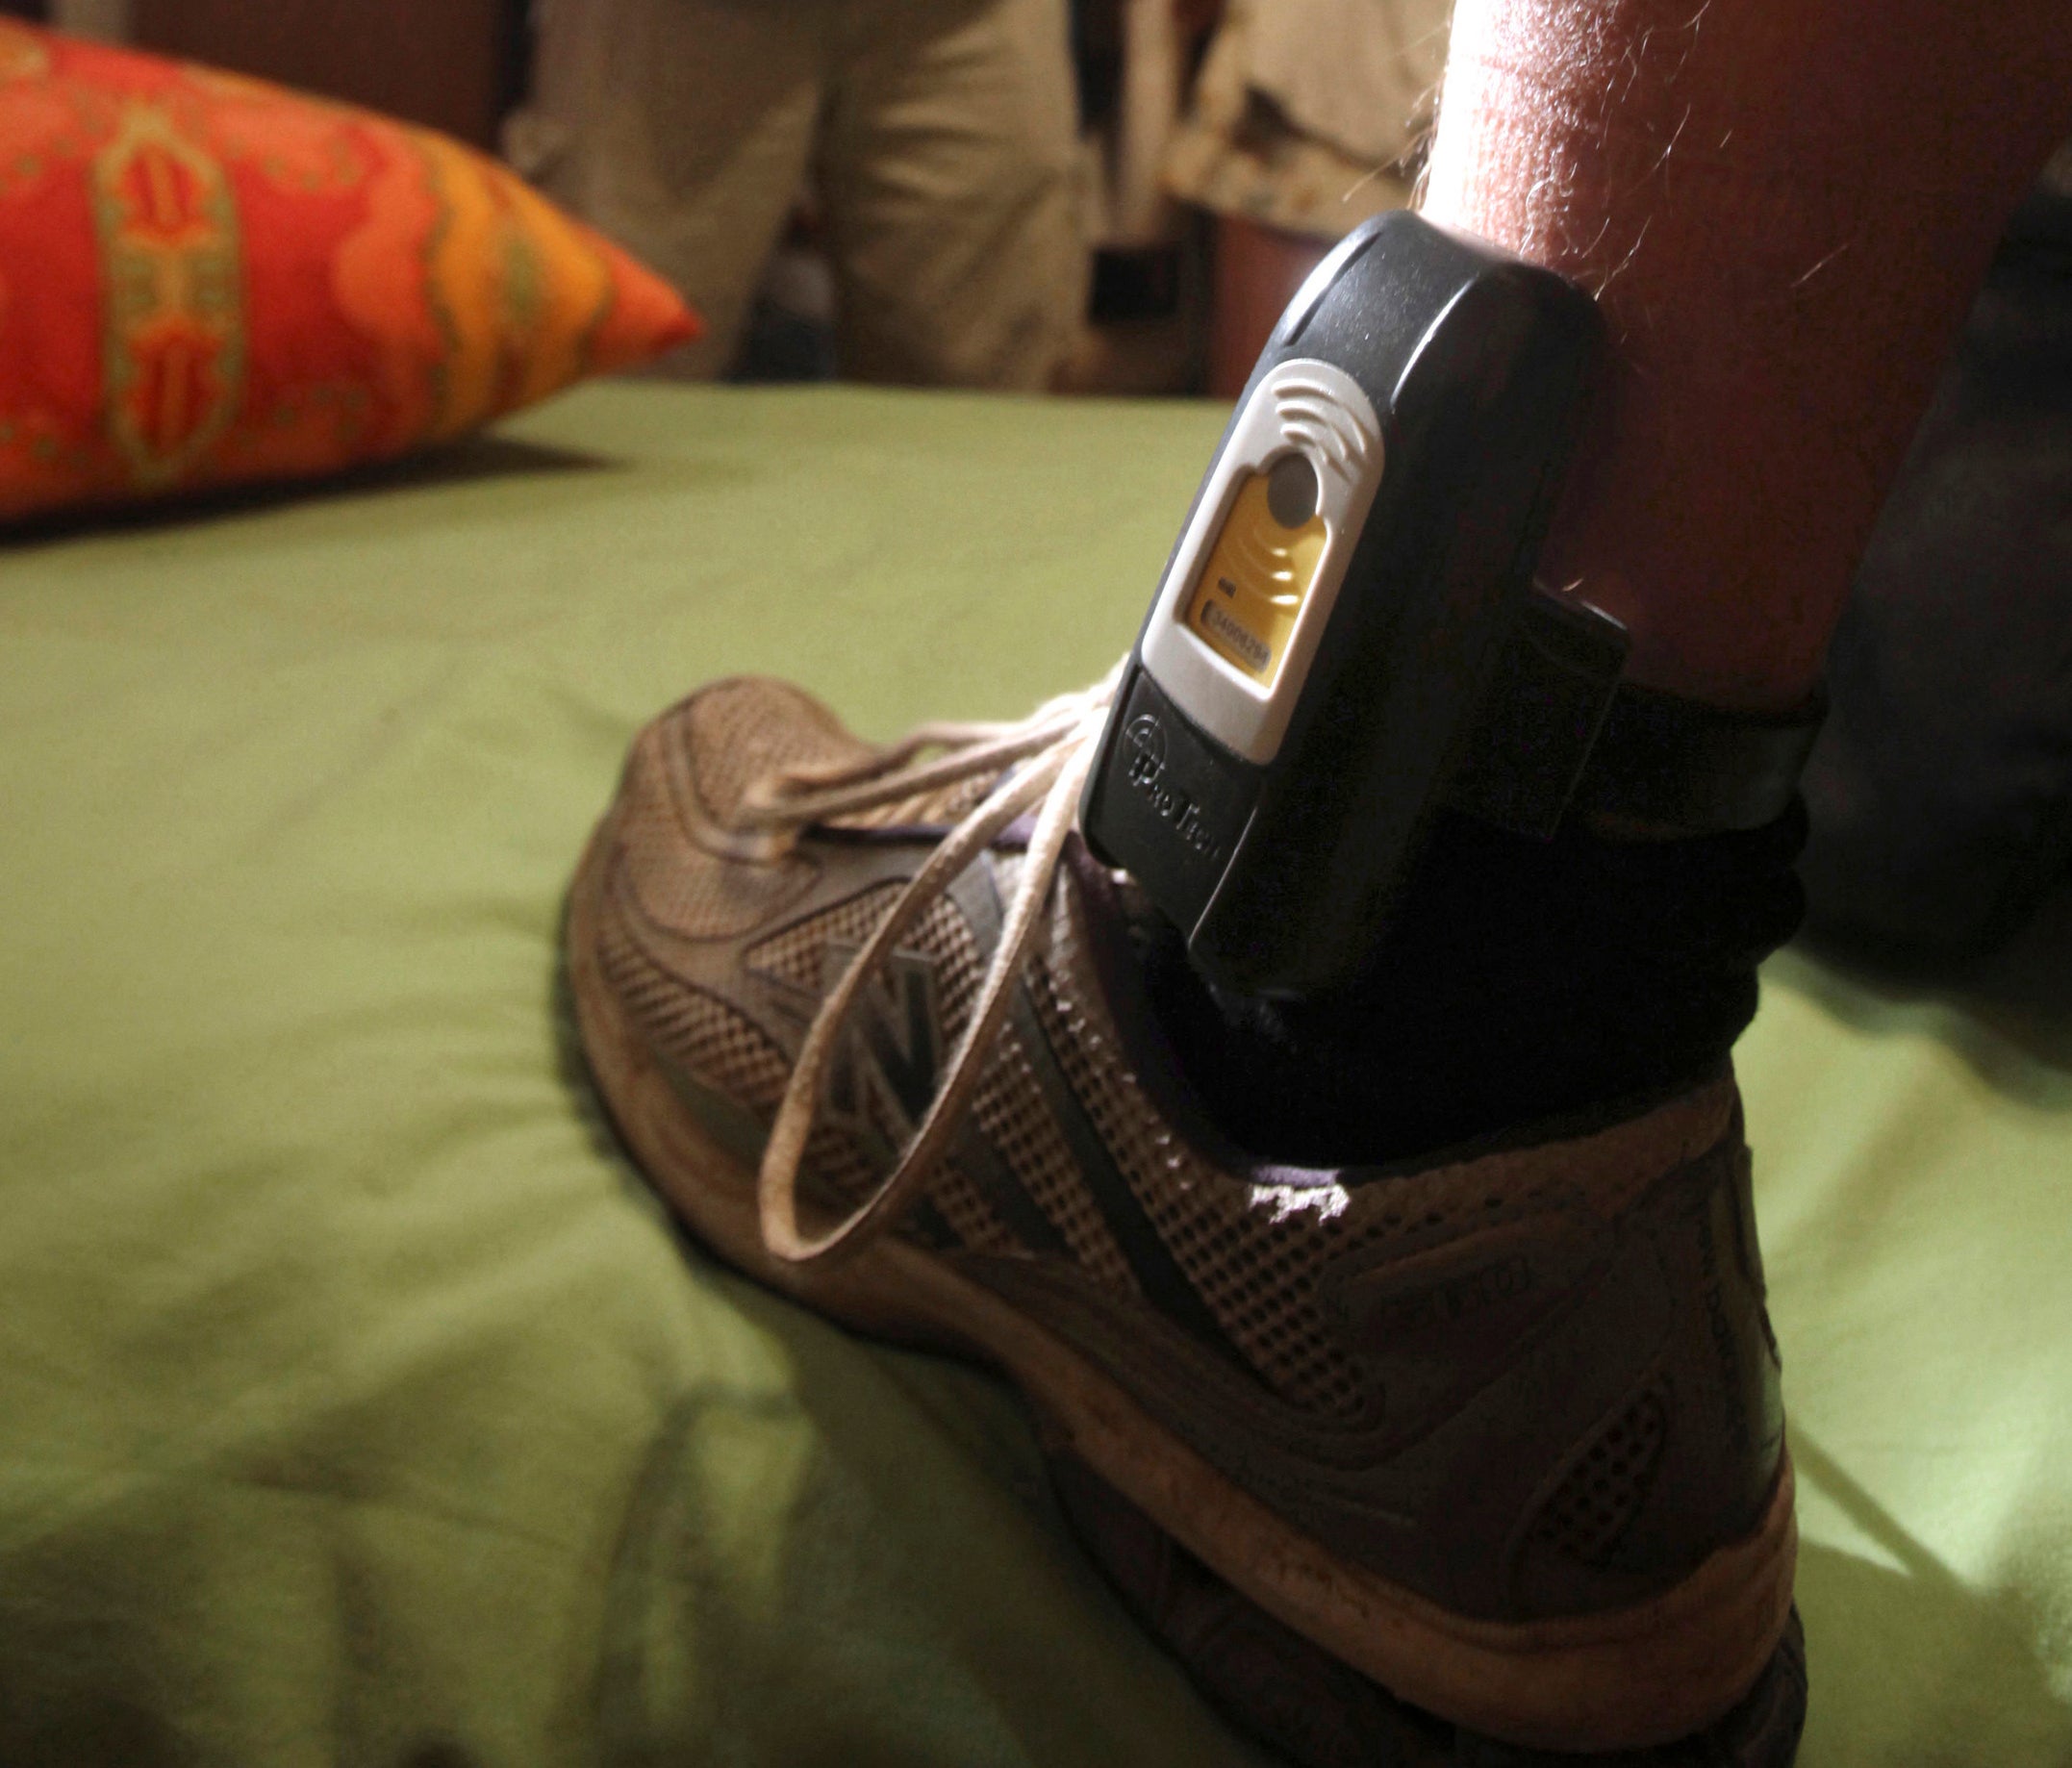 What's the Maker of Post-it Notes Doing in the Ankle Monitor Business?  Struggling - Bloomberg